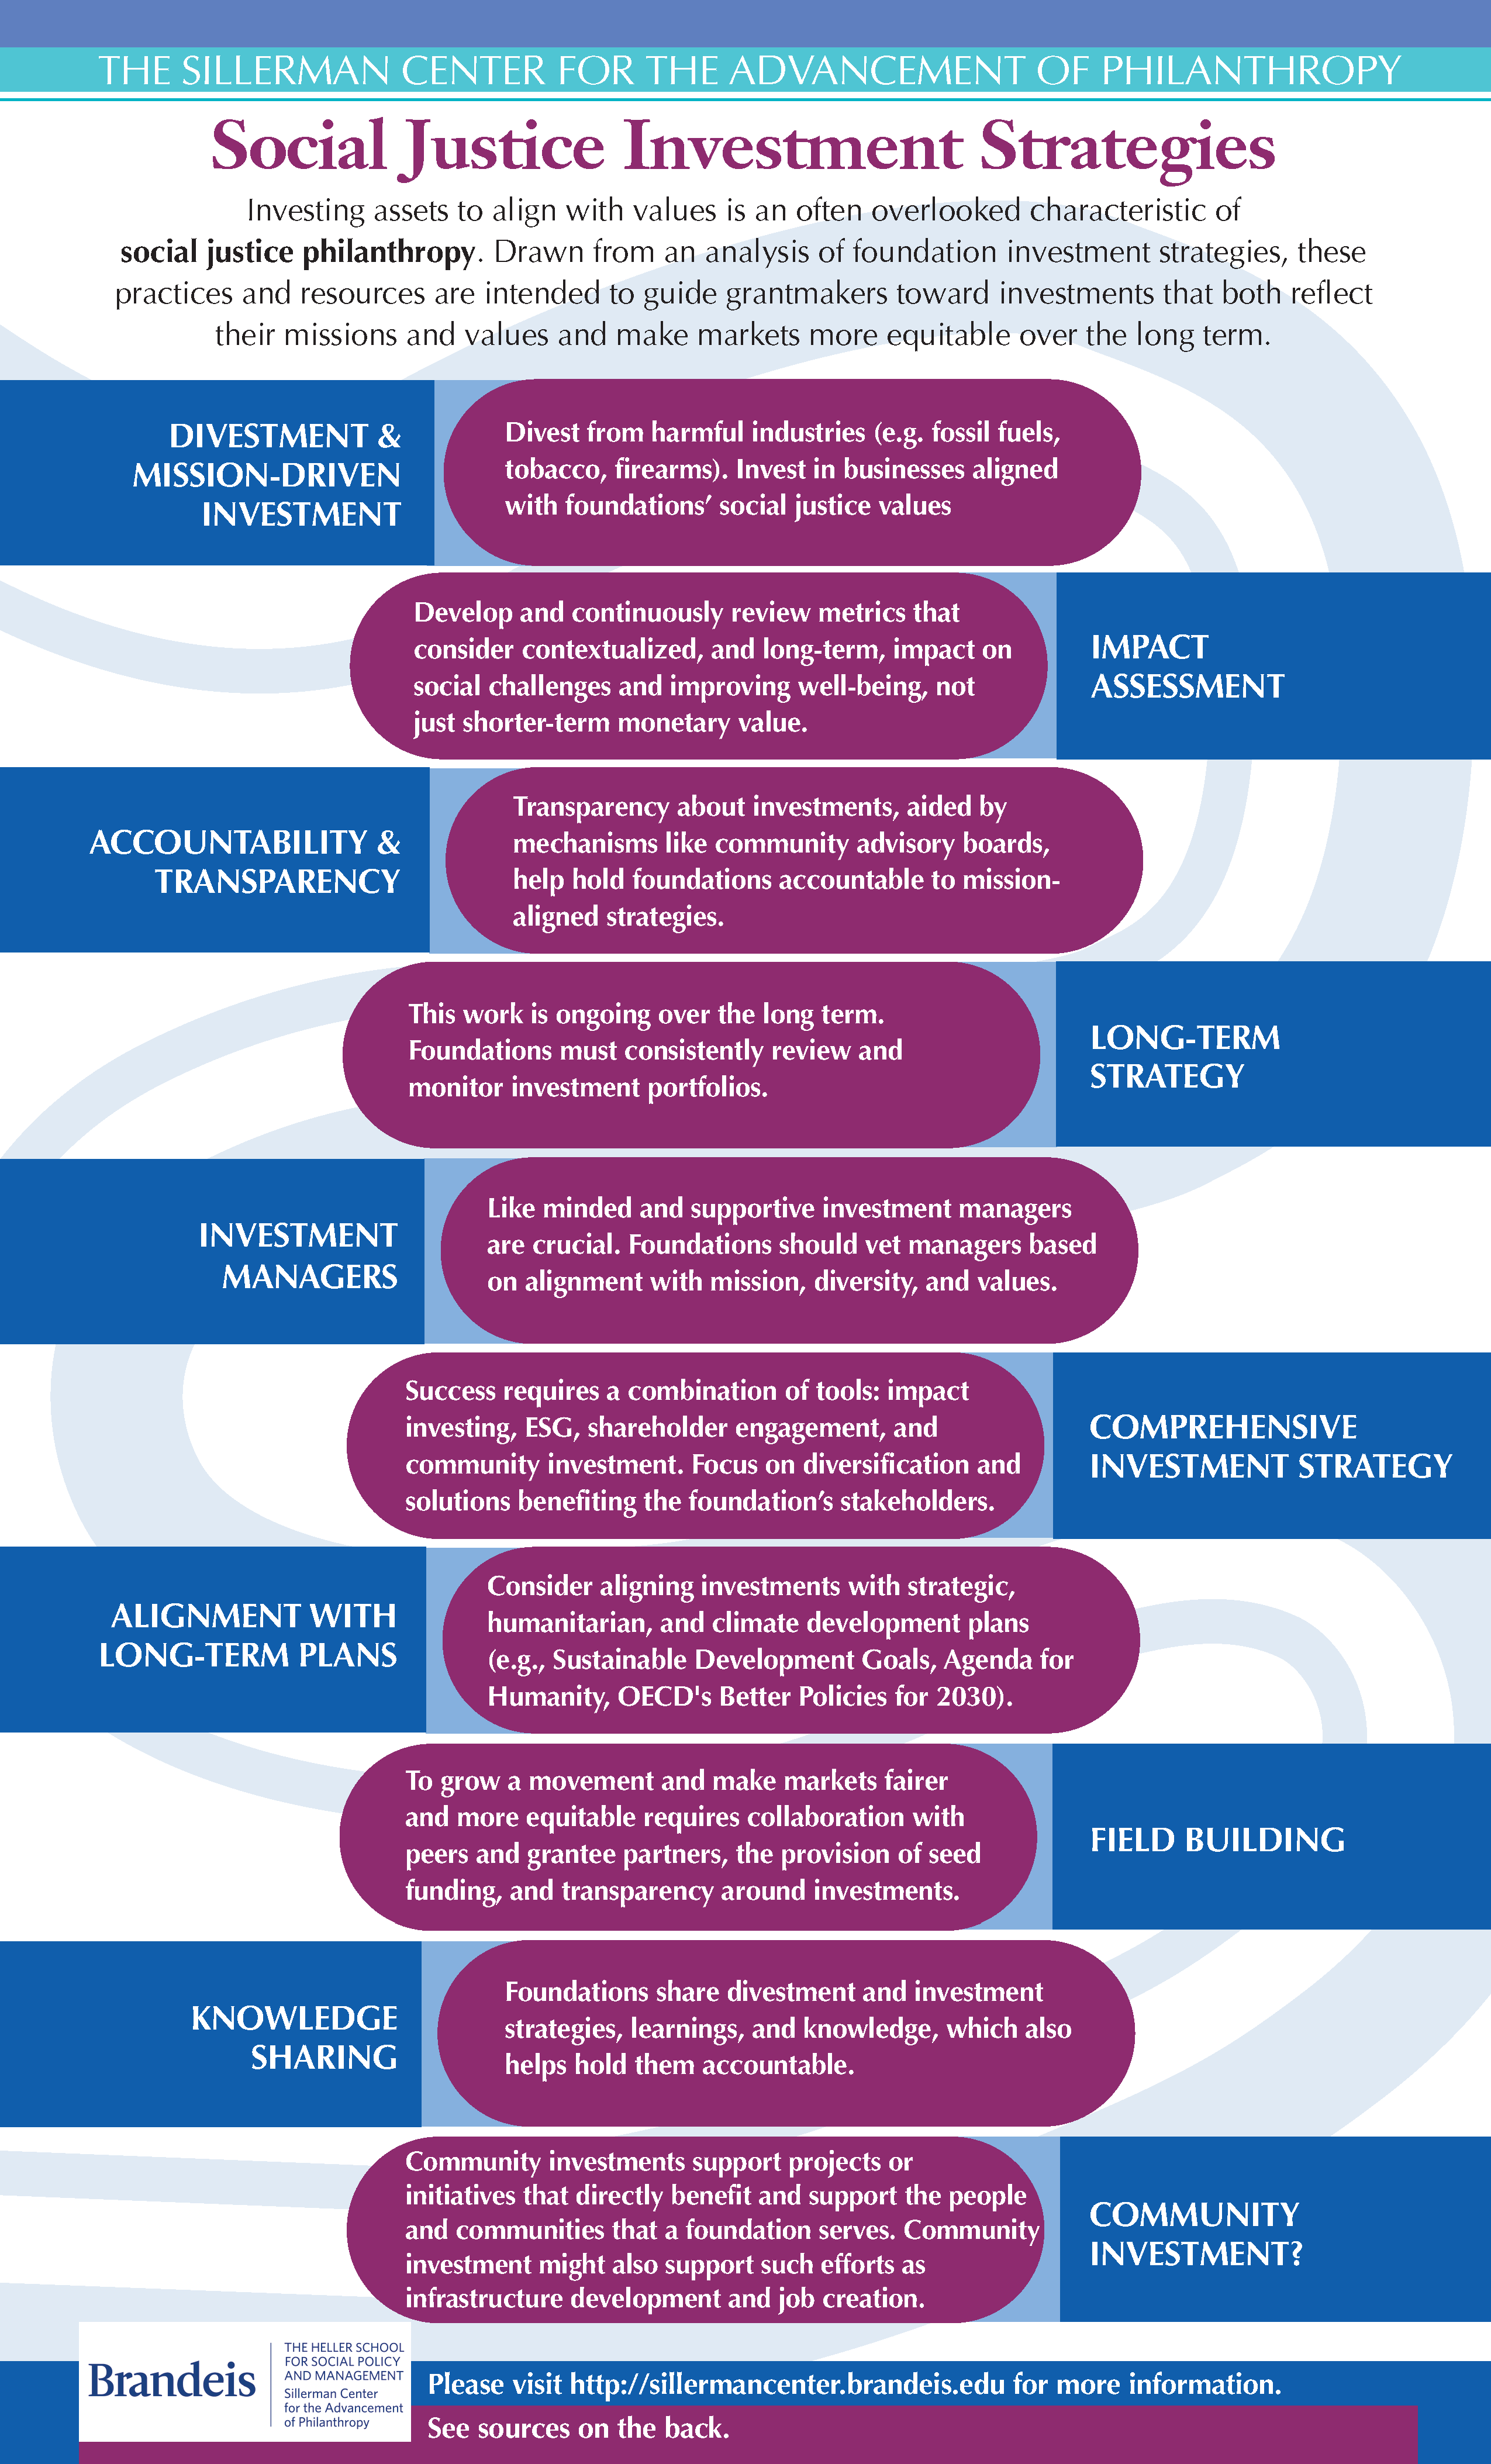 Social Justice Philanthropy Investment Strategy Infographic